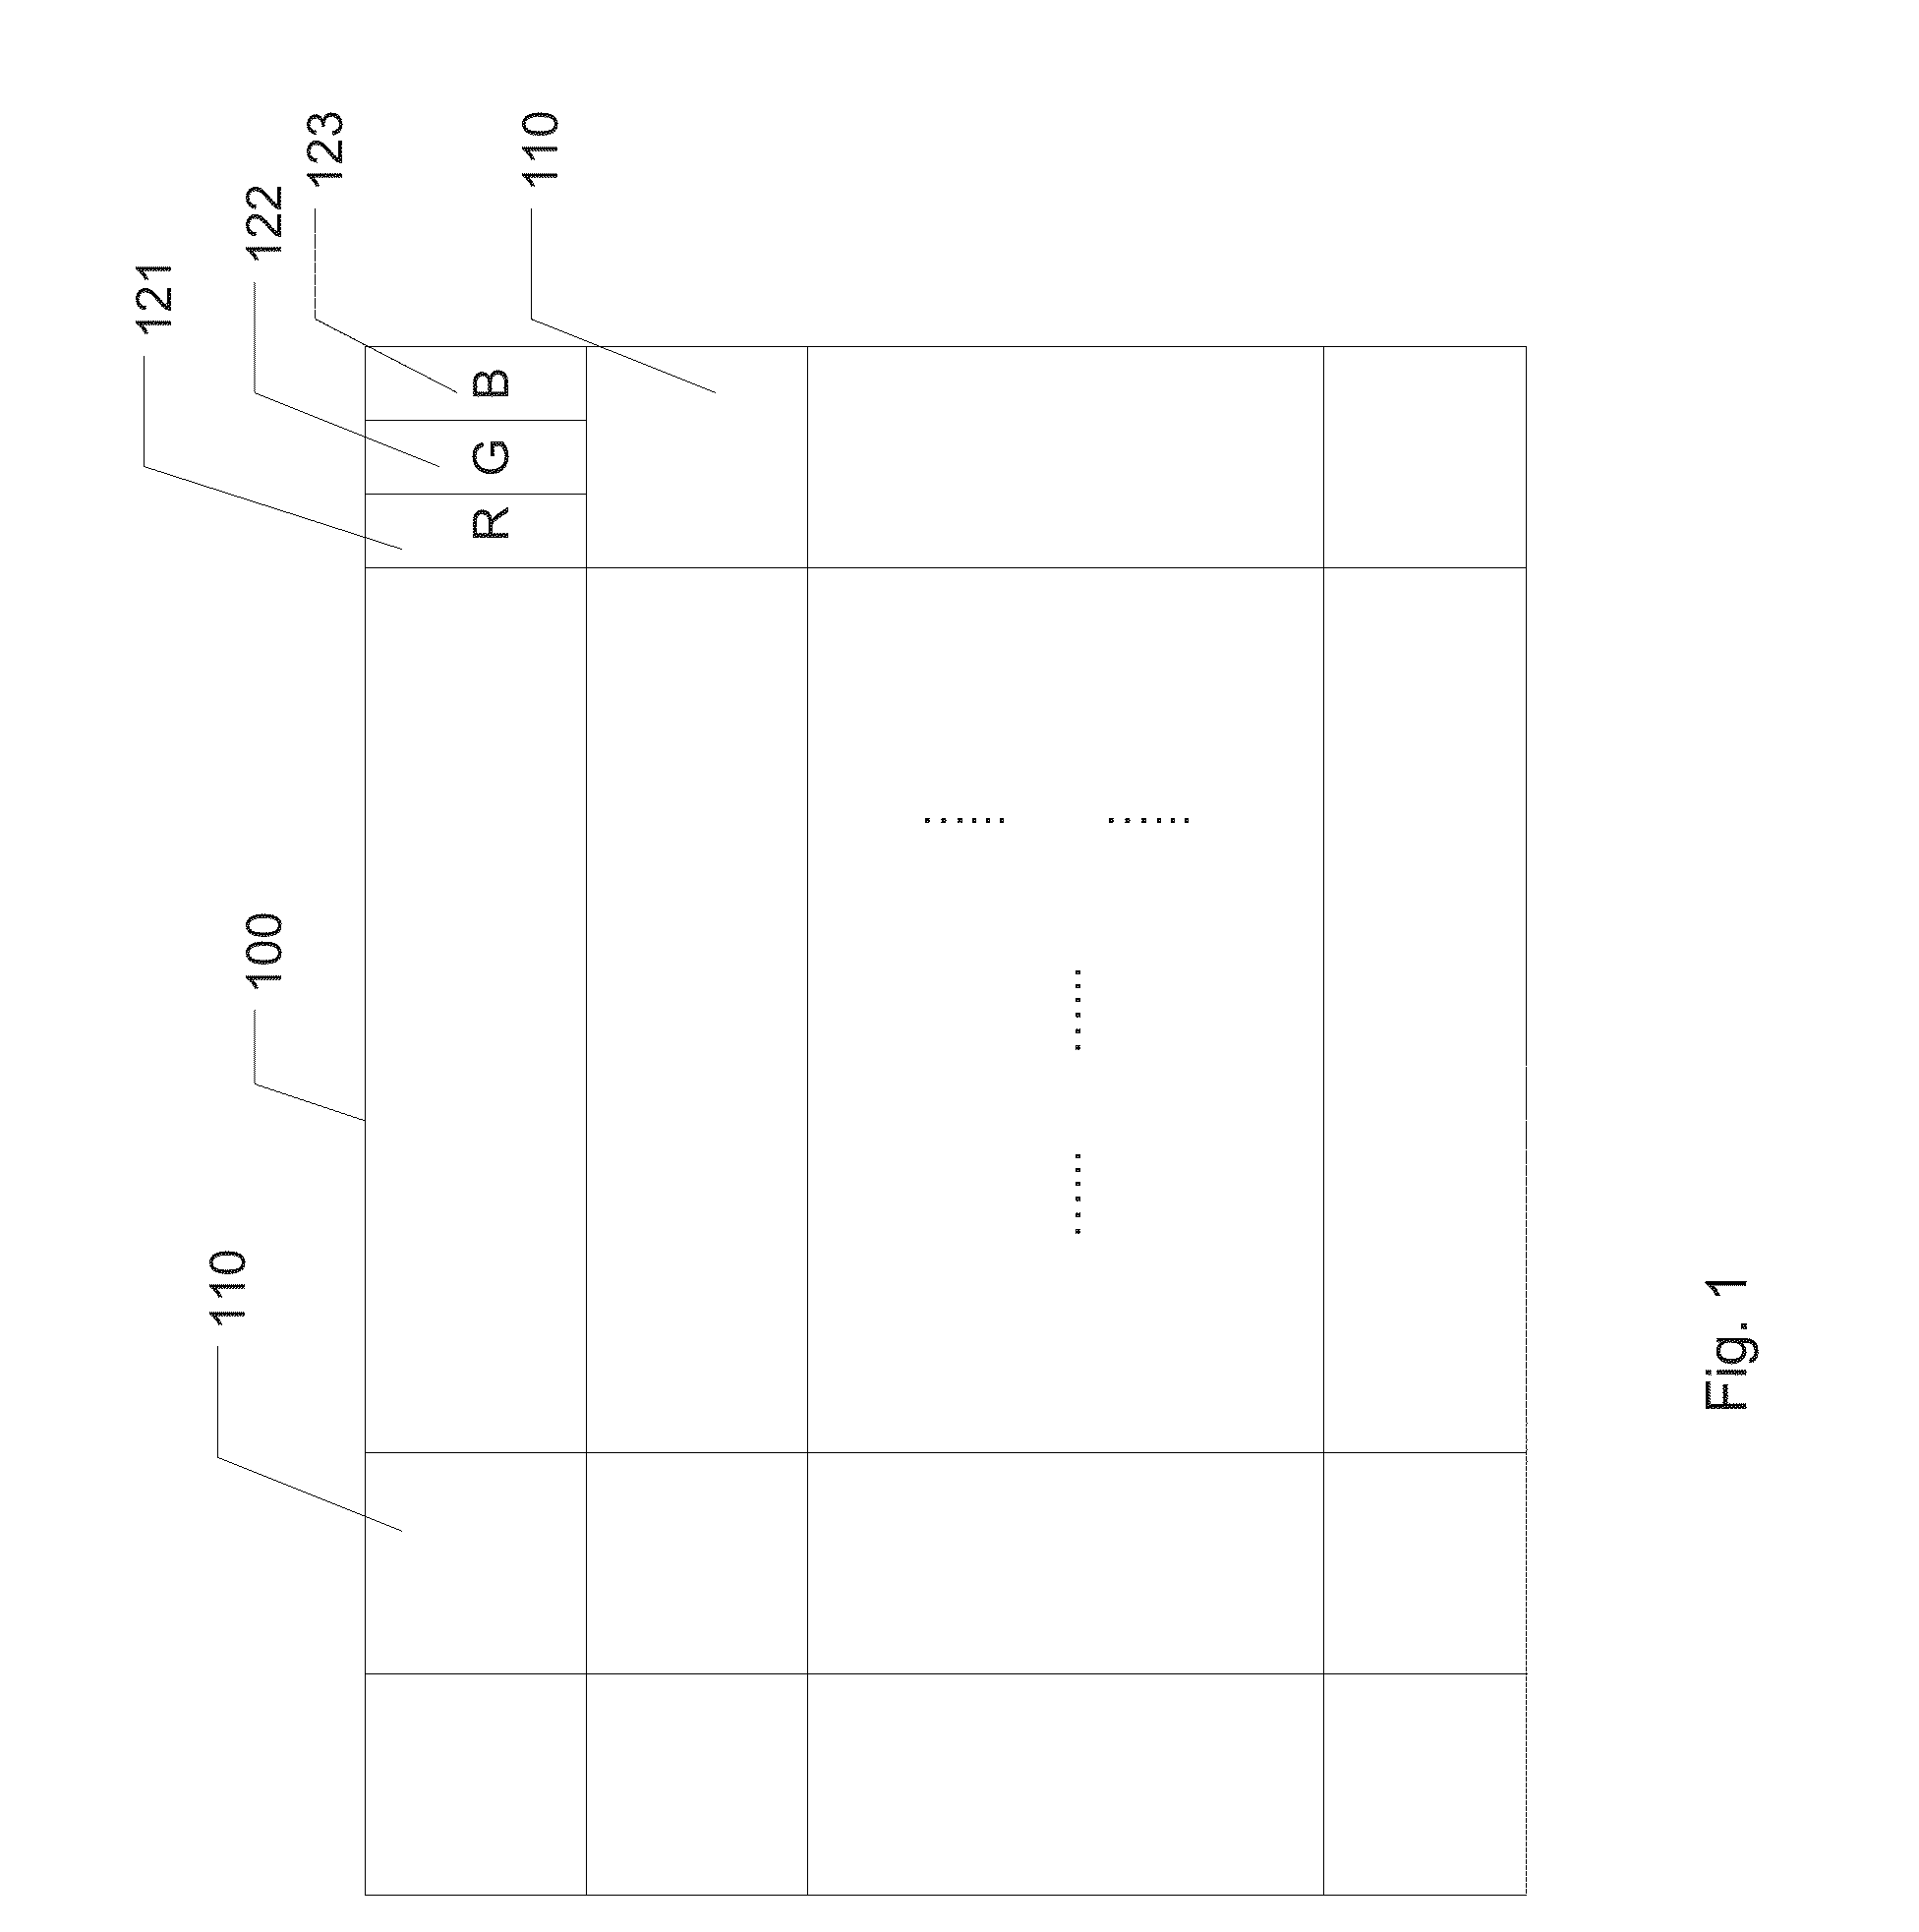 Display device with binary mode amoled pixel pattern